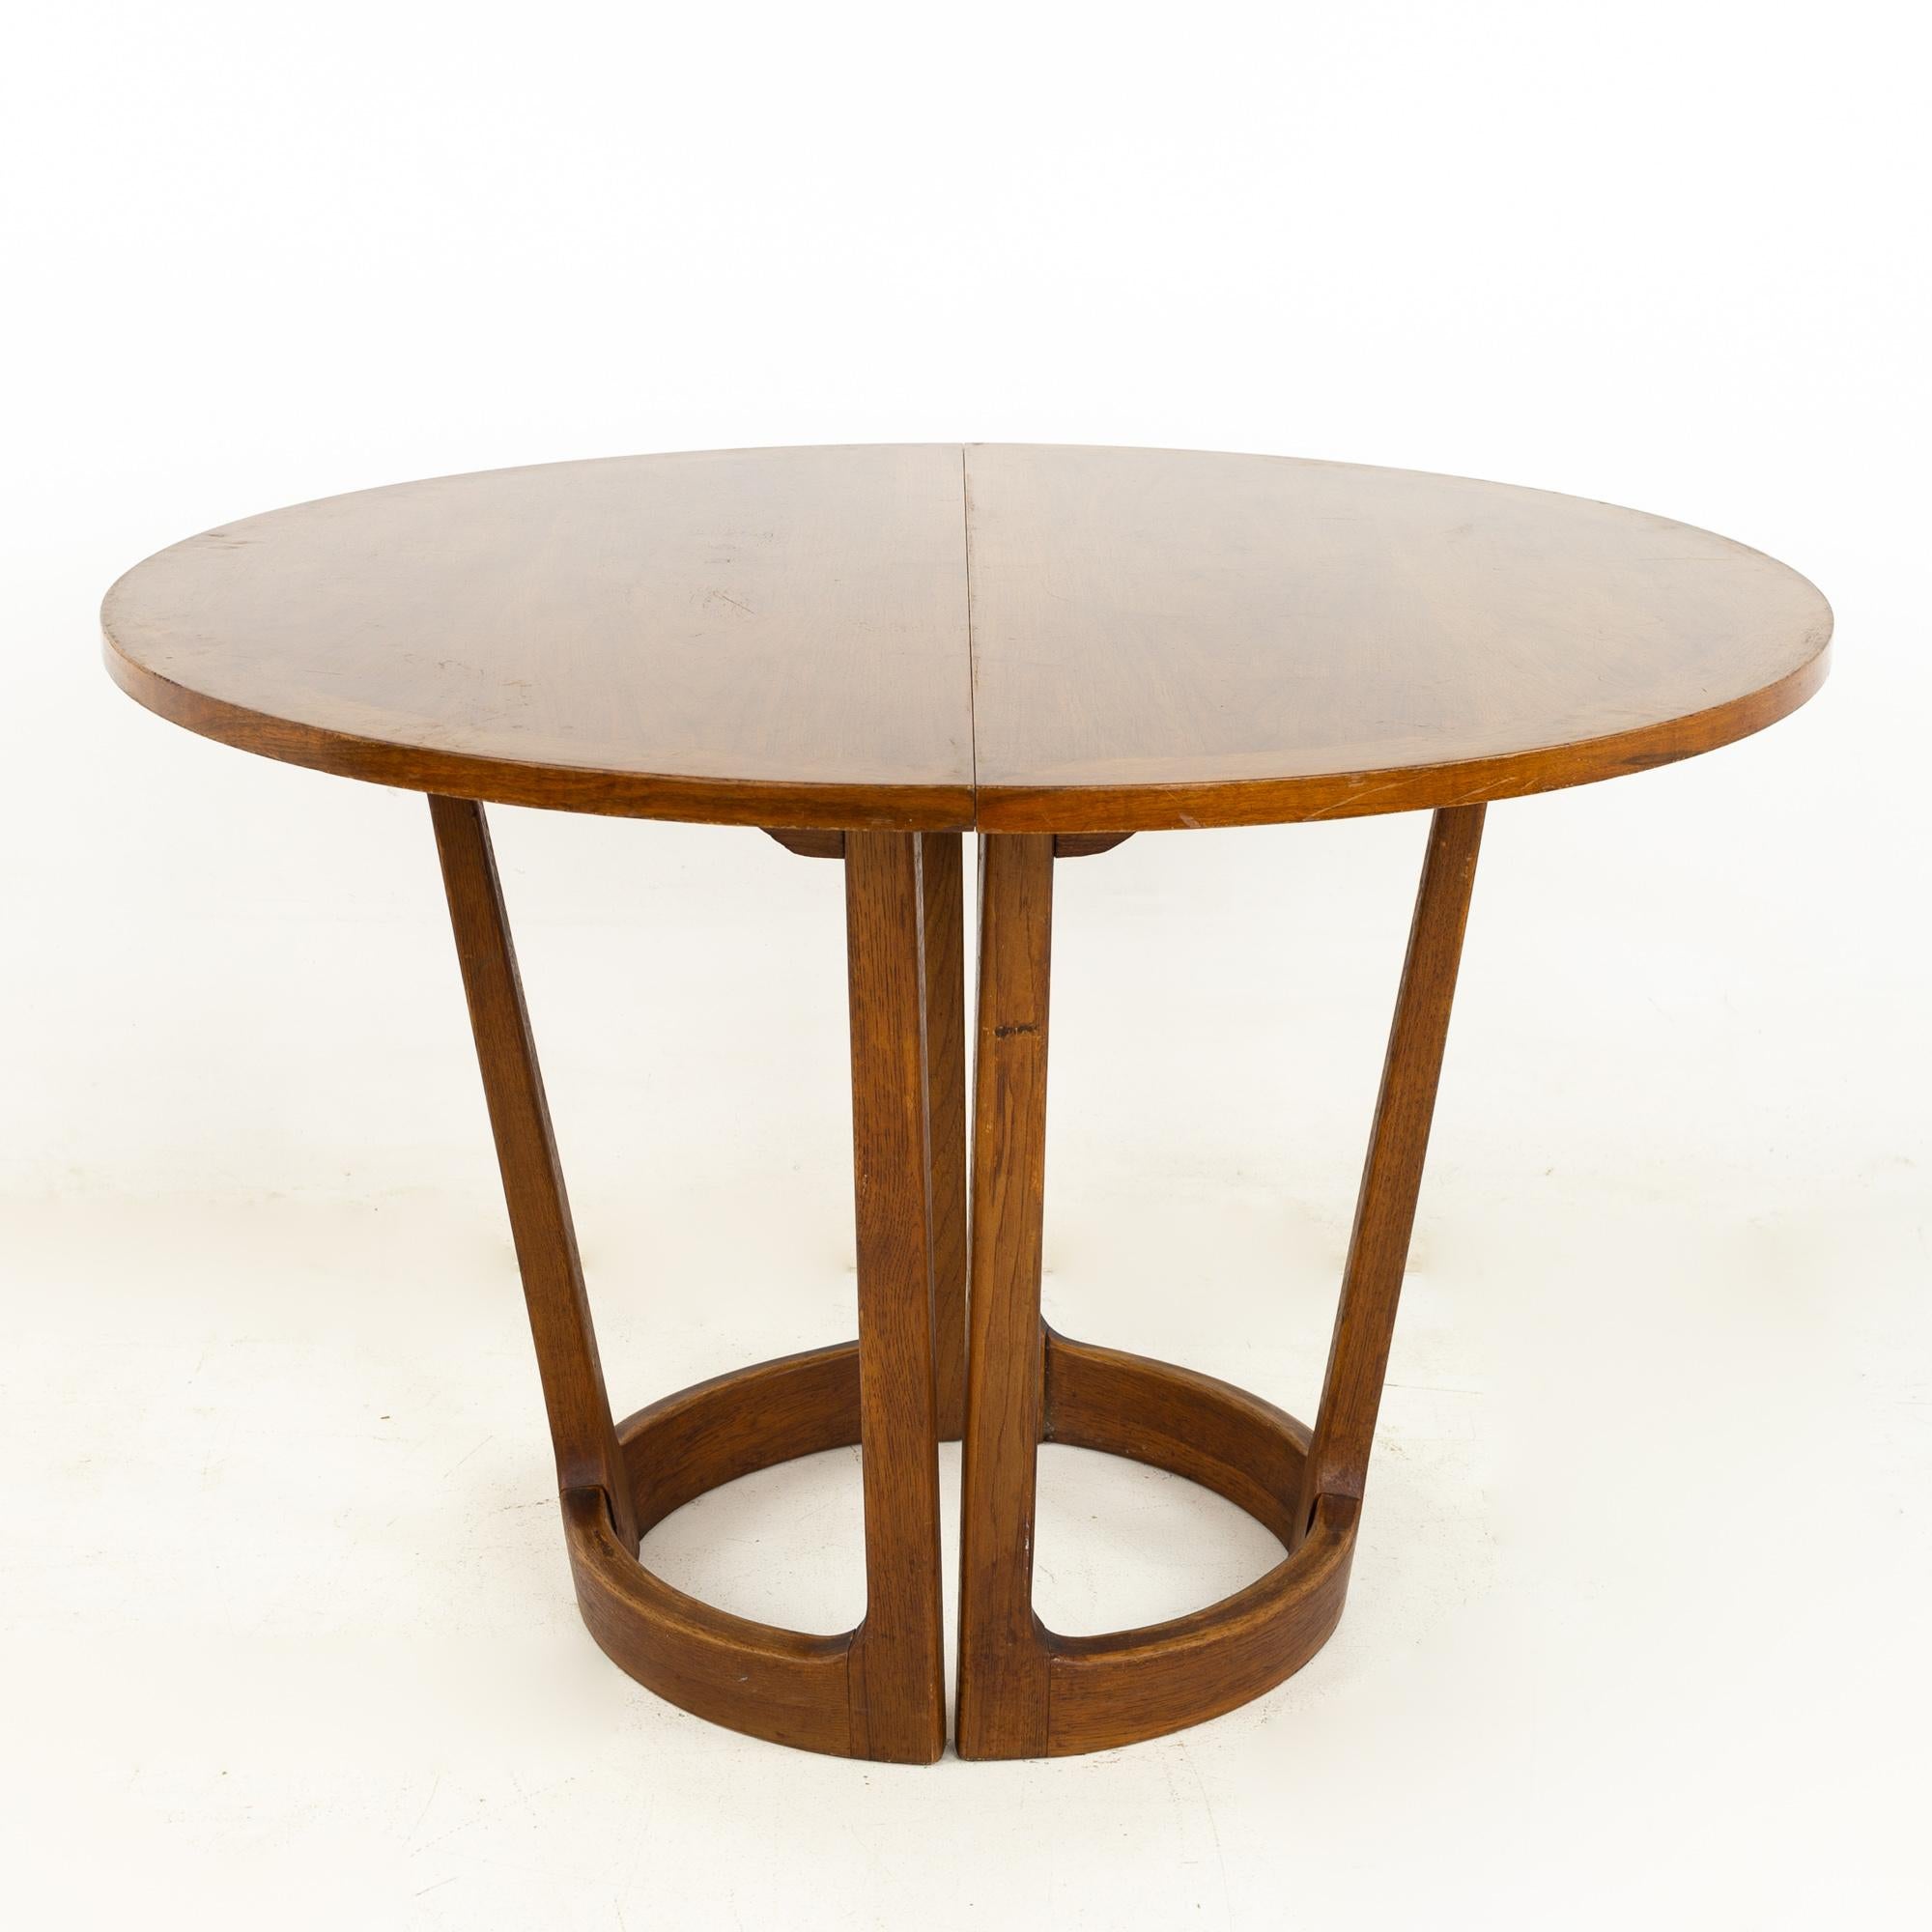 Lane Rhythm mid century round dining table

This table measures: 44 wide x 44 deep x 29 inches high, with a chair clearance of 28 inches; each leaf is 18 inches wide, making a maximum table width of 80 inches when both leaves are used

?All